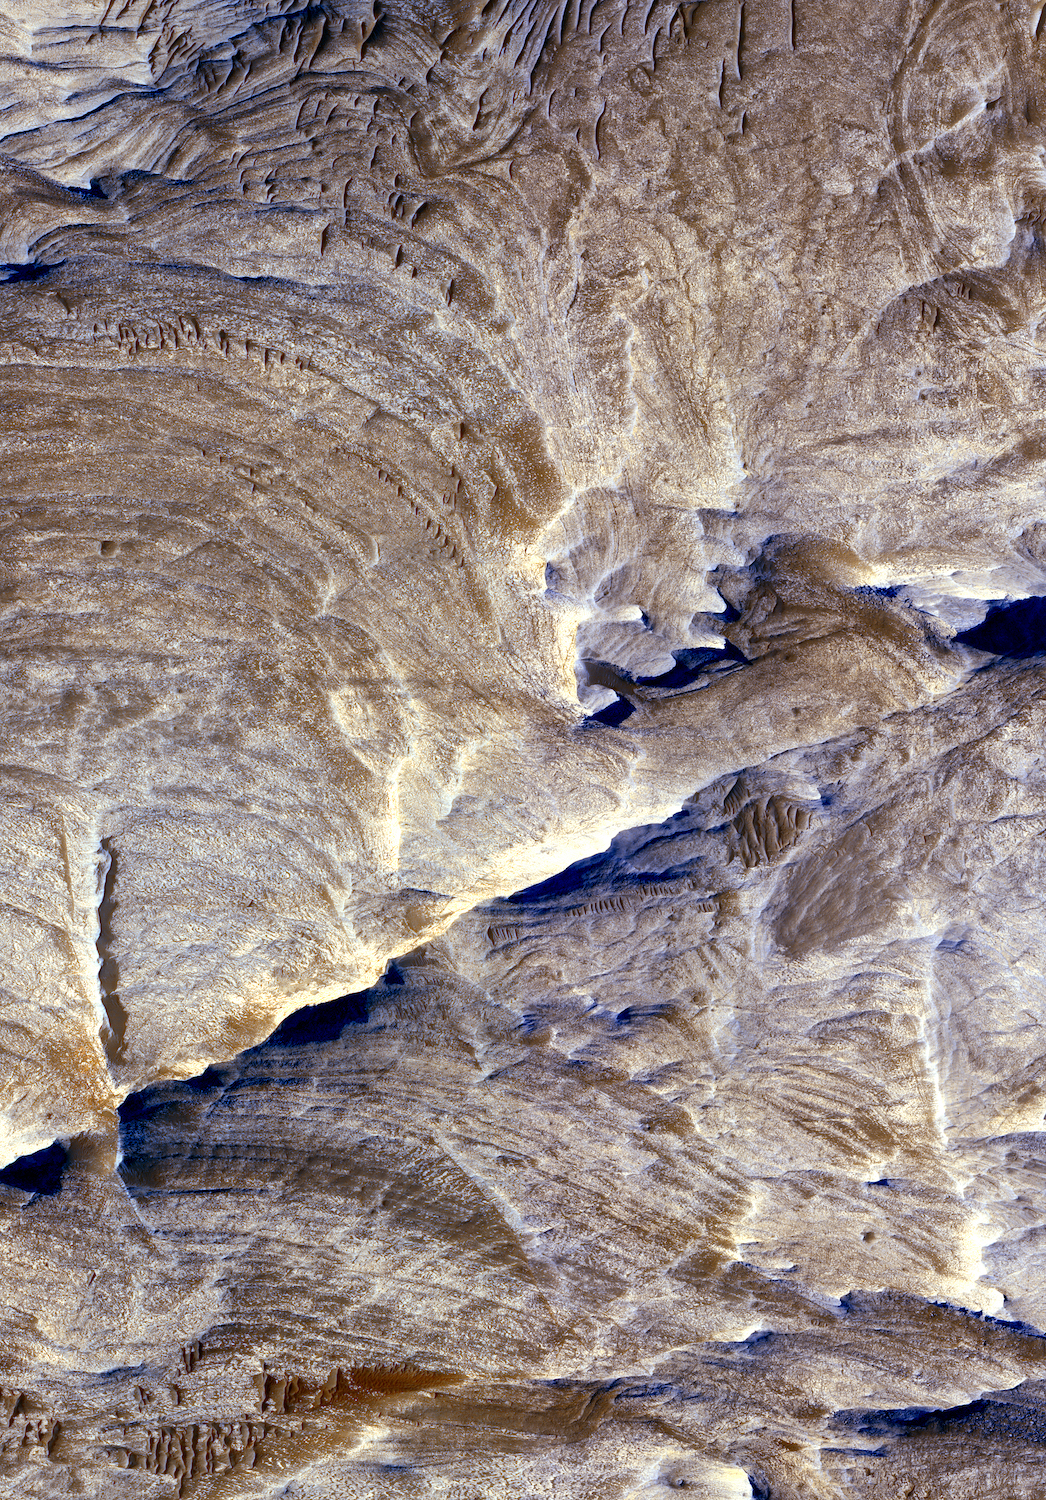 An overhead view of a rock formation on the surface of Mars